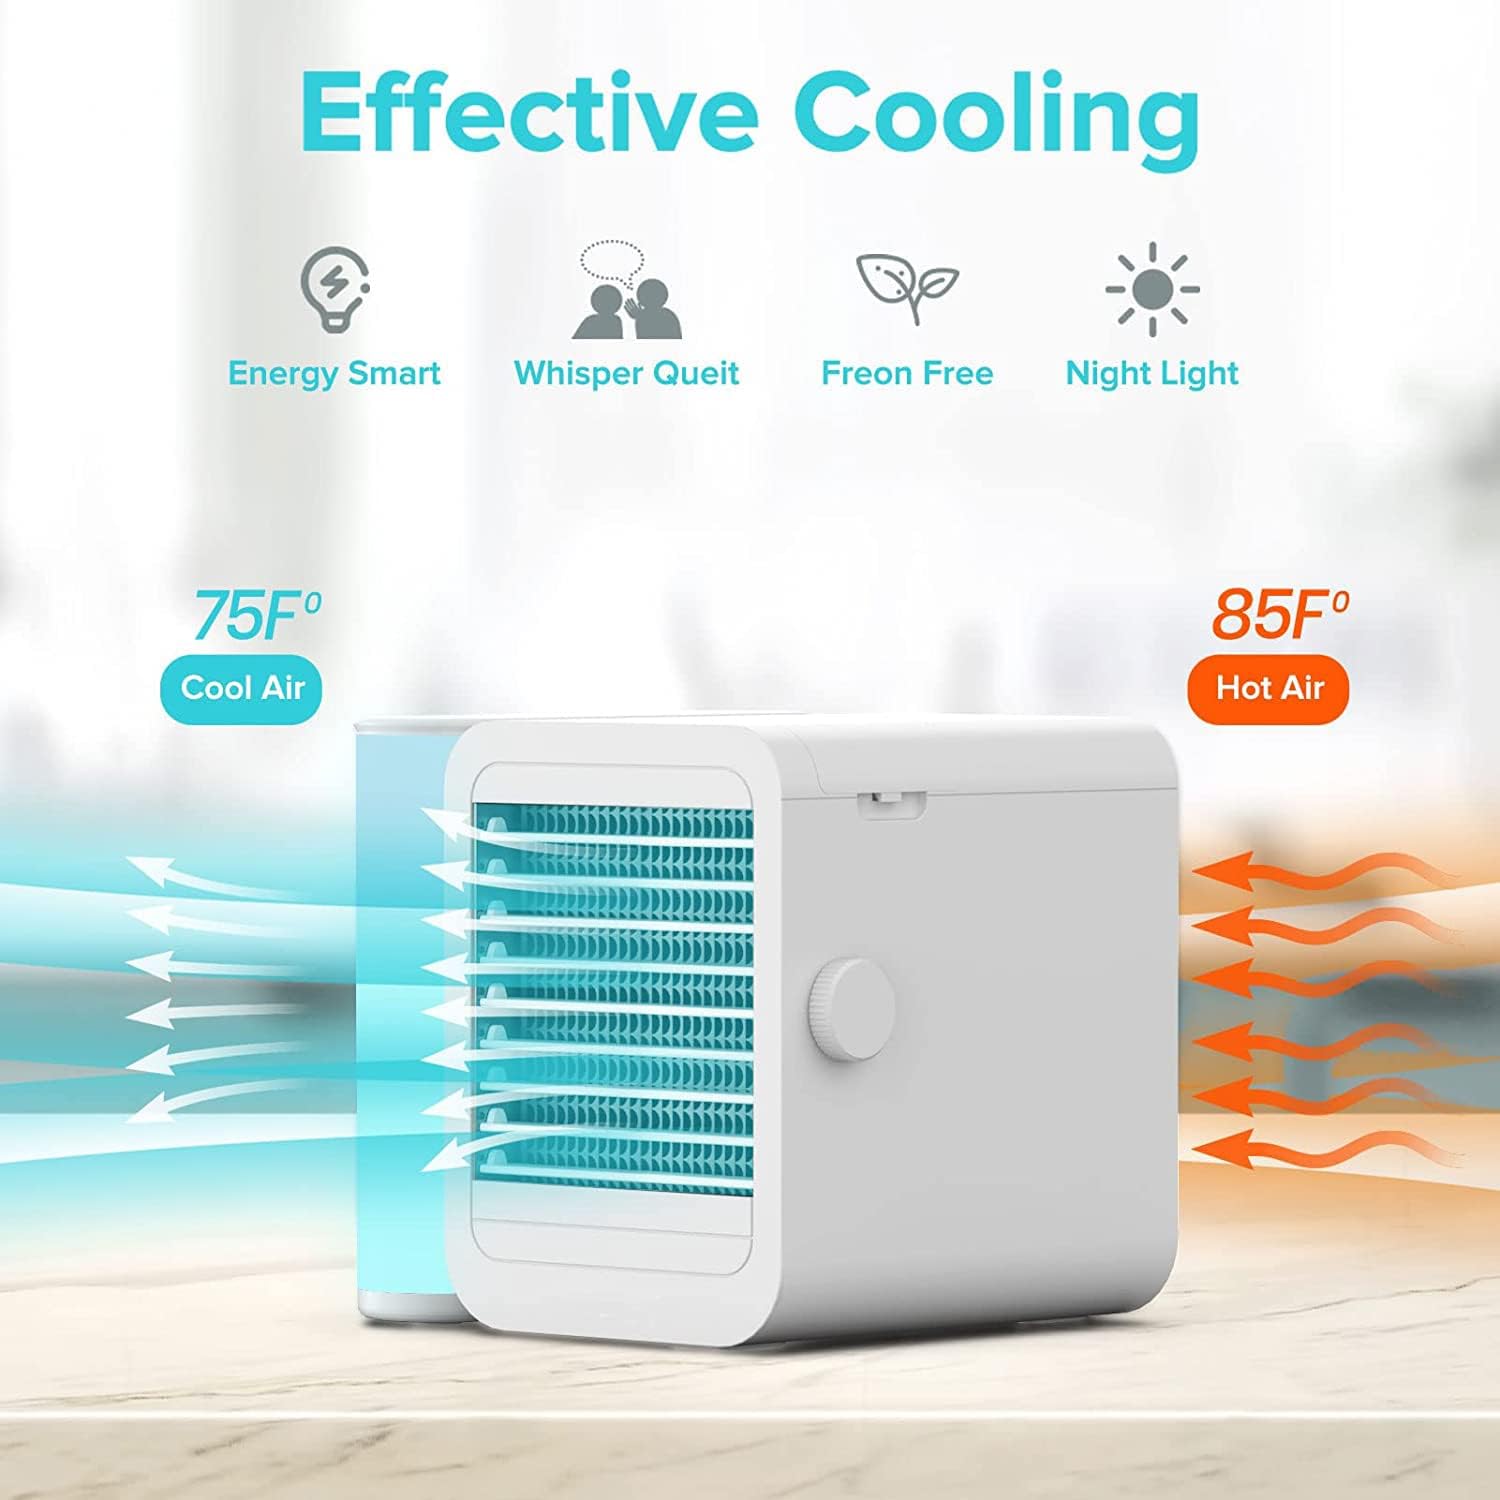 Portable Air Conditioners Fan: 1000ml Evaporative Mini Air Cooler with 3 Speeds, 7 LED Light, Personal Air Cooler Desktop Cooling Fan, Air Conditioner Portable AC Unit for Home Room Office Desk